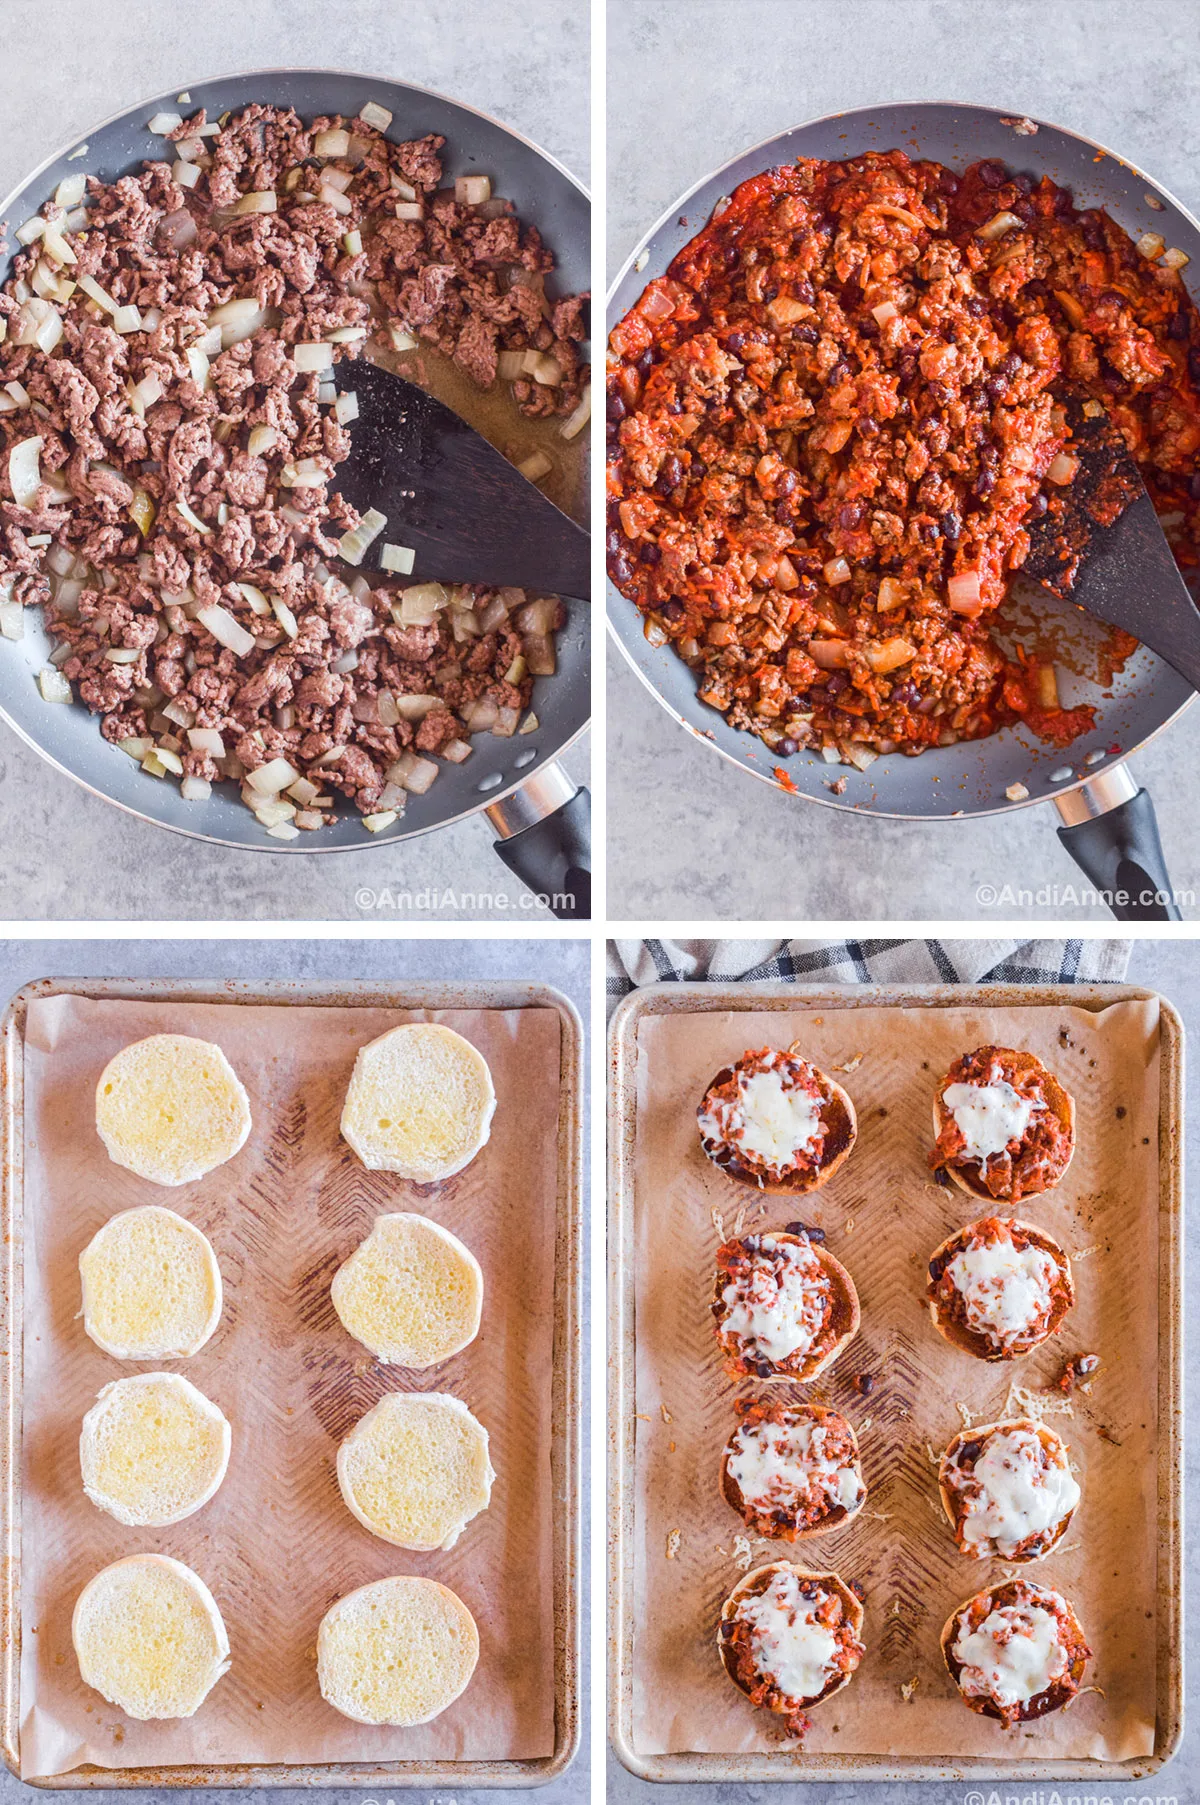 Four images grouped together showing steps to make recipe. First is ground beef and onion in frying pan. Second is ground beef mixed with pizza sauce, black beans and spices. Third is buns on a baking sheet. Fourth is pizza sloppy joes on a baking sheet.